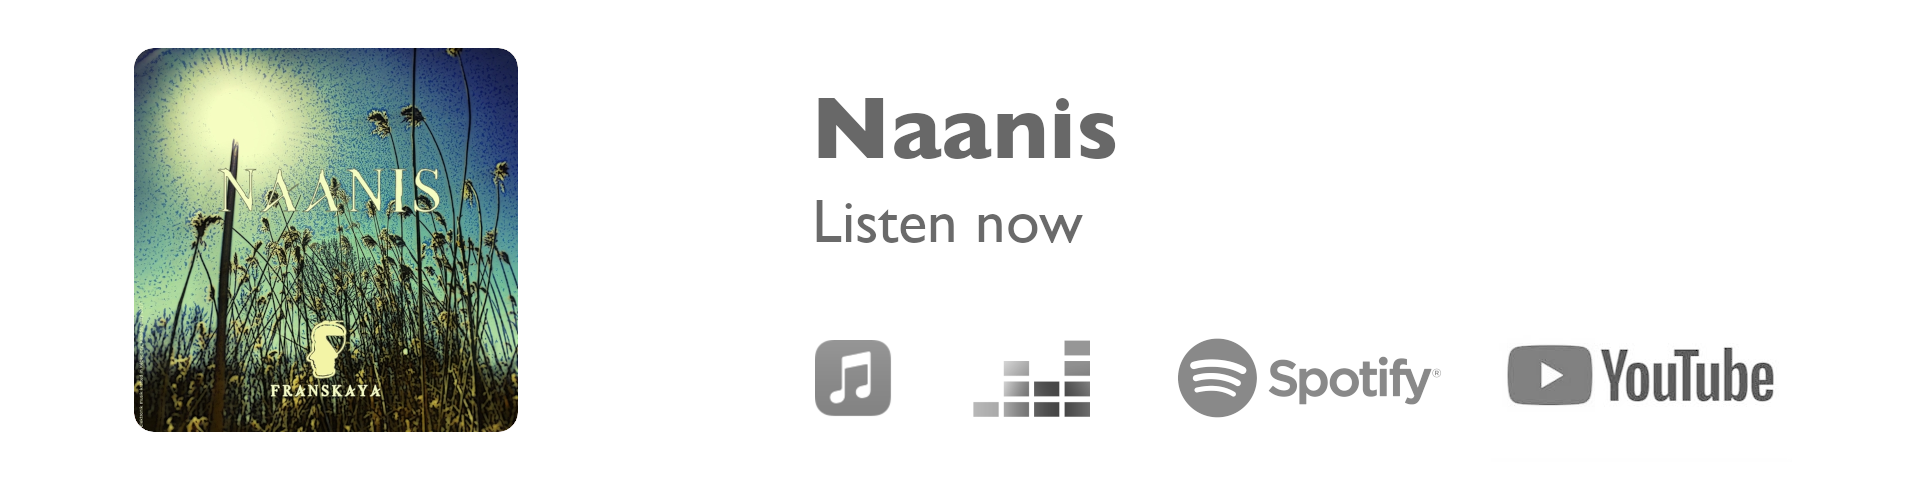 Clic to play Naanis in the streaming platform of your choice